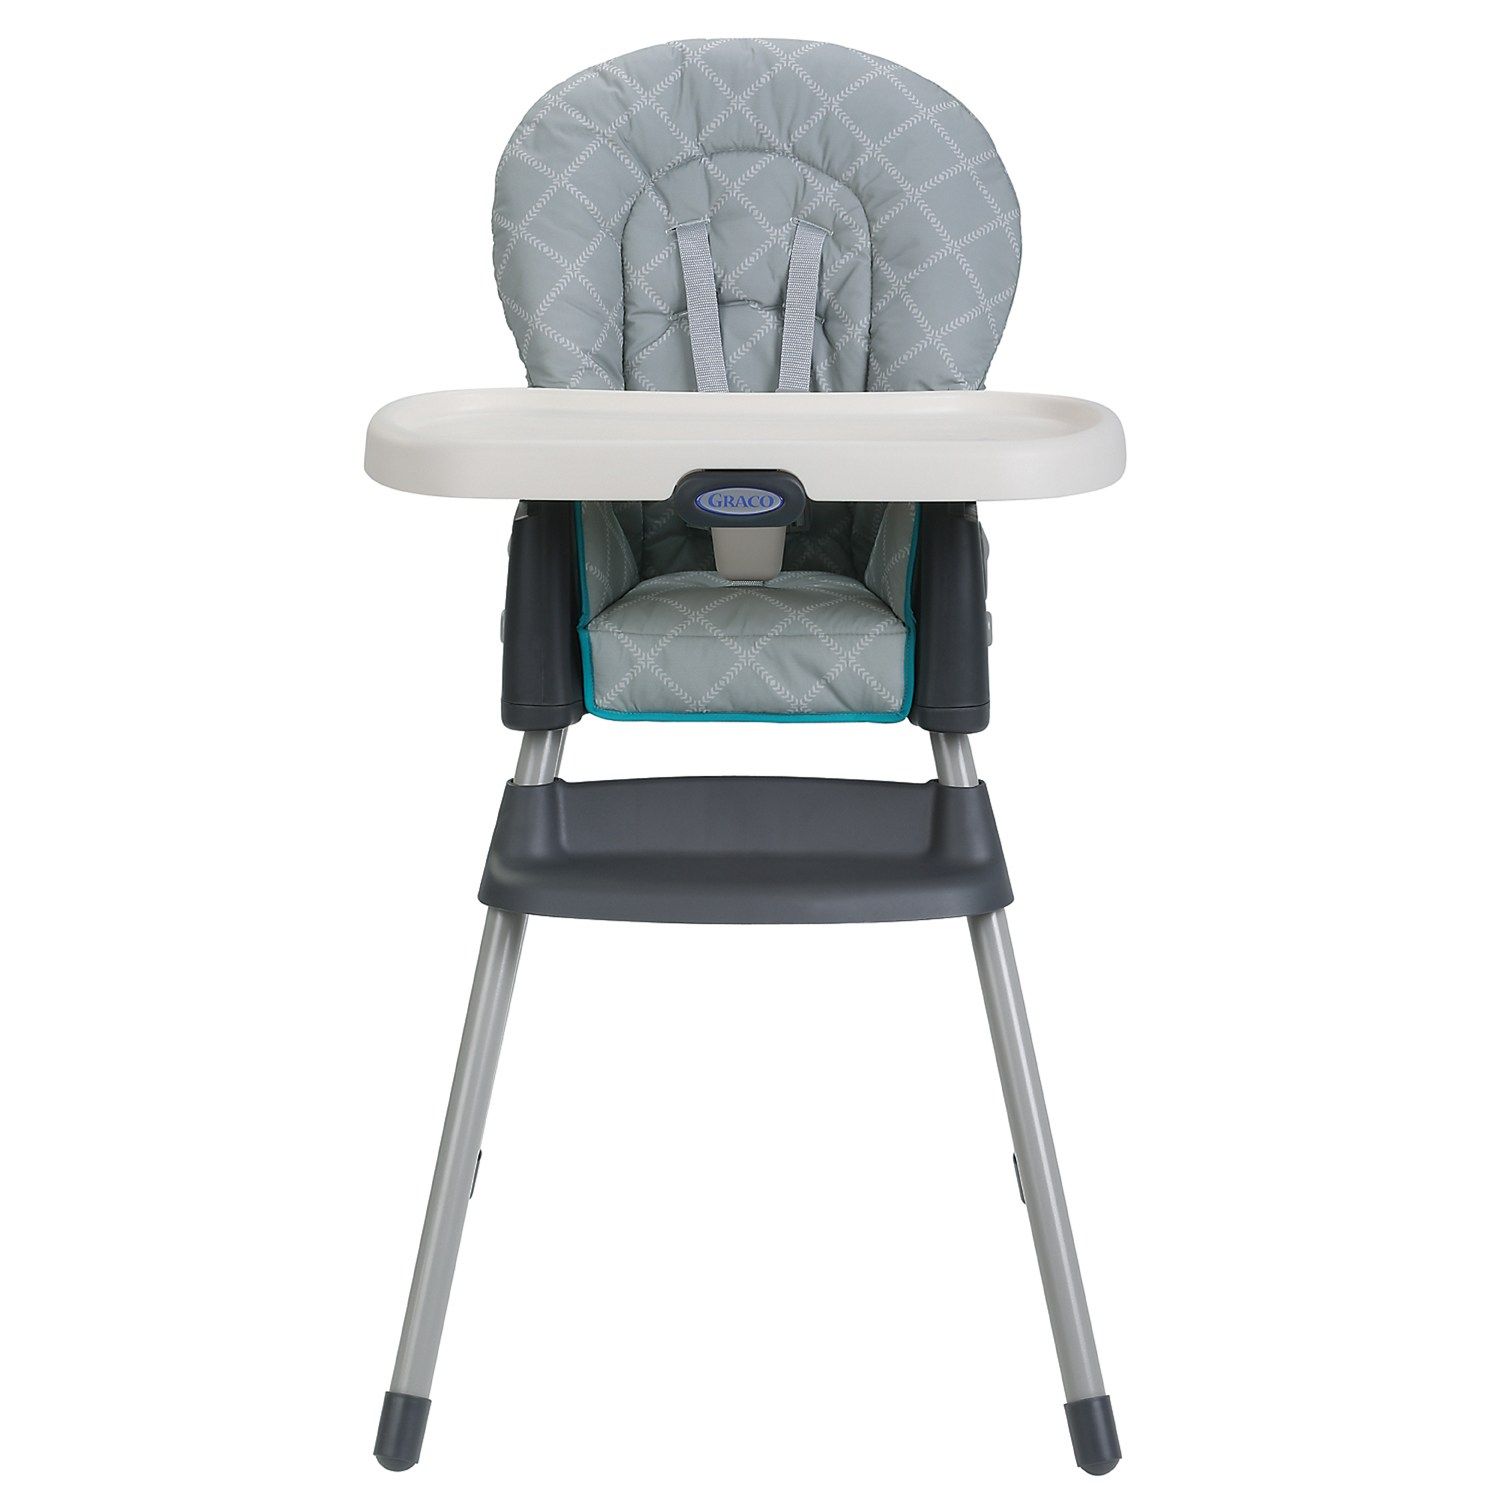 How To Turn Graco High Chair Into Table